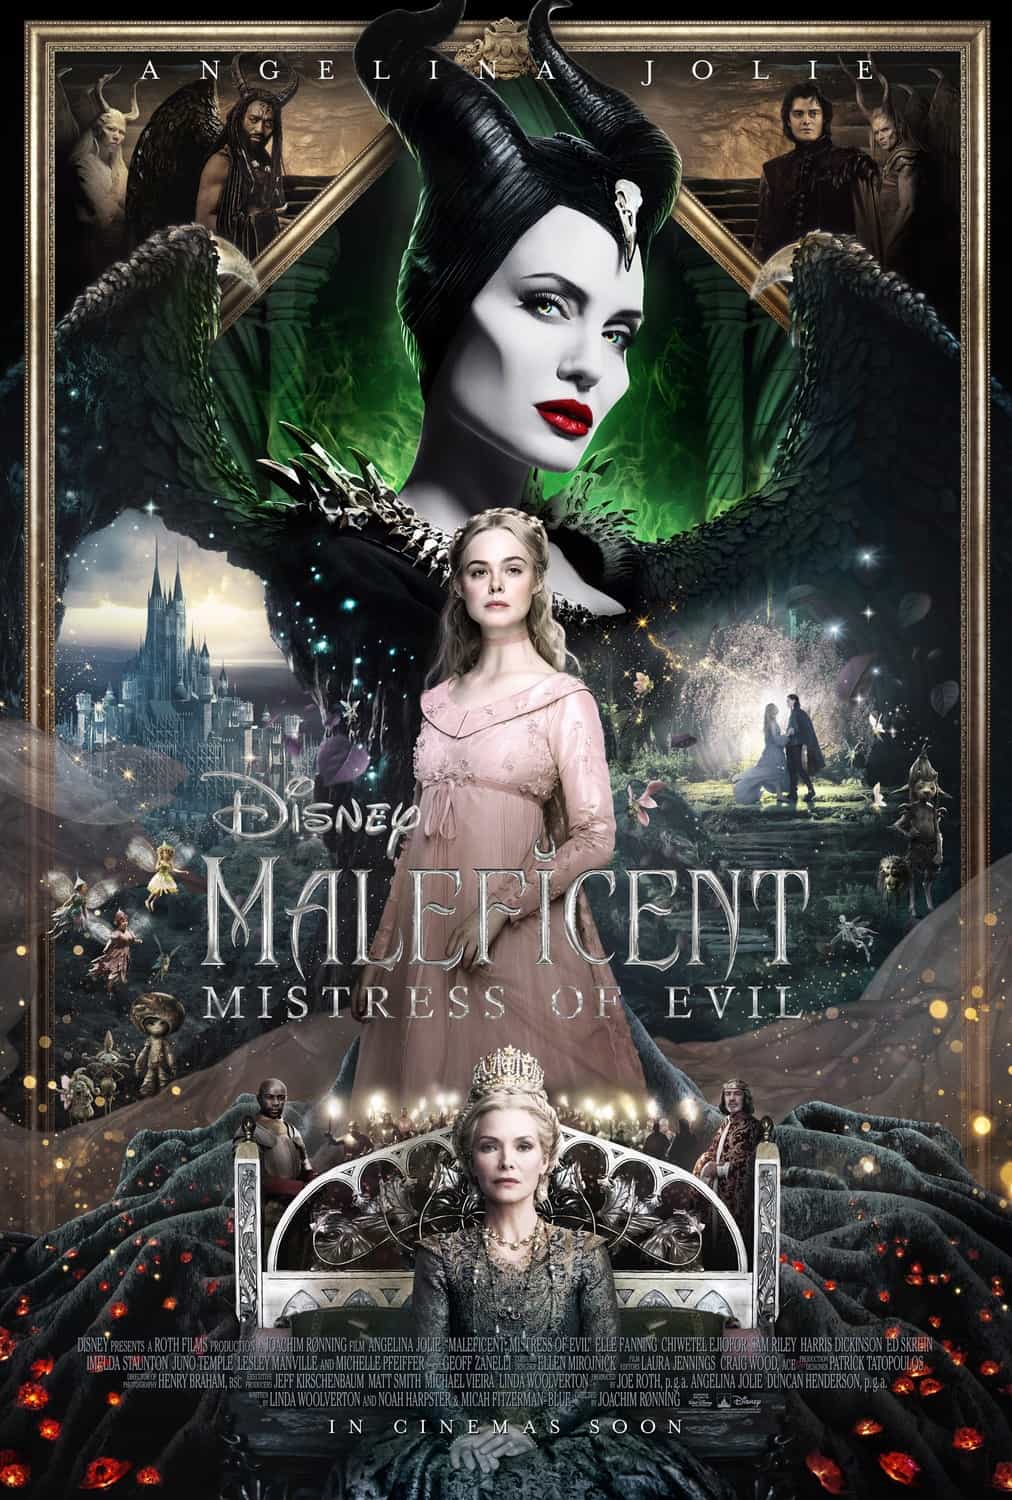 Disney announce title and new poster for Angelina Jolie starring Maleficent 2